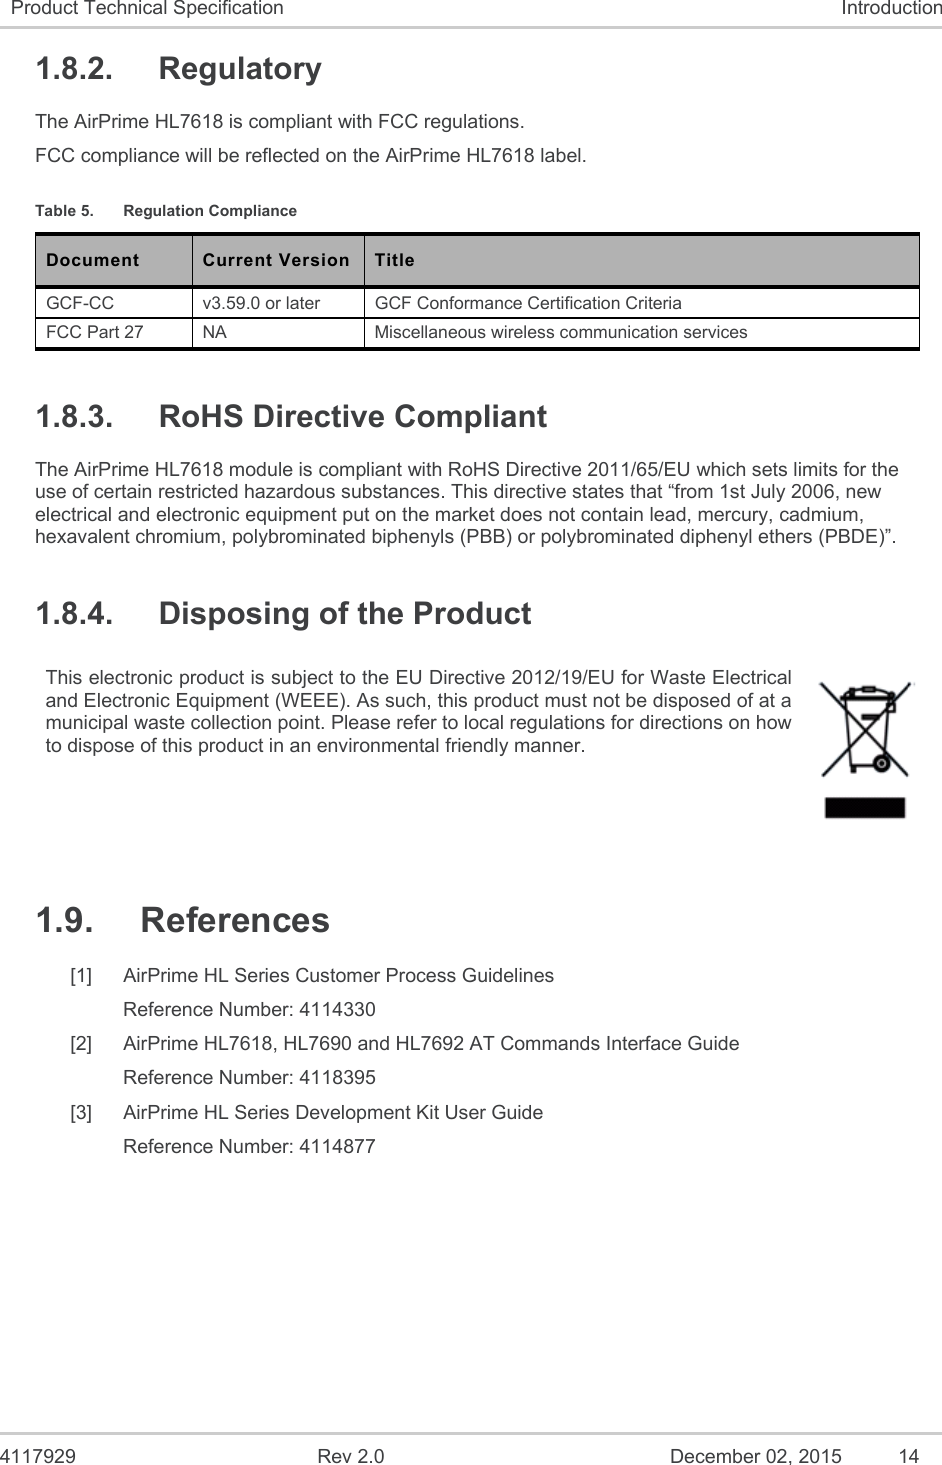  4117929  Rev 2.0  December 02, 2015  14 Product Technical Specification  Introduction 1.8.2.  Regulatory The AirPrime HL7618 is compliant with FCC regulations. FCC compliance will be reflected on the AirPrime HL7618 label. Table 5.  Regulation Compliance Document  Current Version  Title GCF-CC  v3.59.0 or later   GCF Conformance Certification Criteria FCC Part 27  NA  Miscellaneous wireless communication services 1.8.3.  RoHS Directive Compliant The AirPrime HL7618 module is compliant with RoHS Directive 2011/65/EU which sets limits for the use of certain restricted hazardous substances. This directive states that “from 1st July 2006, new electrical and electronic equipment put on the market does not contain lead, mercury, cadmium, hexavalent chromium, polybrominated biphenyls (PBB) or polybrominated diphenyl ethers (PBDE)”. 1.8.4.  Disposing of the Product This electronic product is subject to the EU Directive 2012/19/EU for Waste Electrical and Electronic Equipment (WEEE). As such, this product must not be disposed of at a municipal waste collection point. Please refer to local regulations for directions on how to dispose of this product in an environmental friendly manner.  1.9.  References [1]  AirPrime HL Series Customer Process Guidelines Reference Number: 4114330 [2]  AirPrime HL7618, HL7690 and HL7692 AT Commands Interface Guide Reference Number: 4118395 [3]  AirPrime HL Series Development Kit User Guide Reference Number: 4114877 